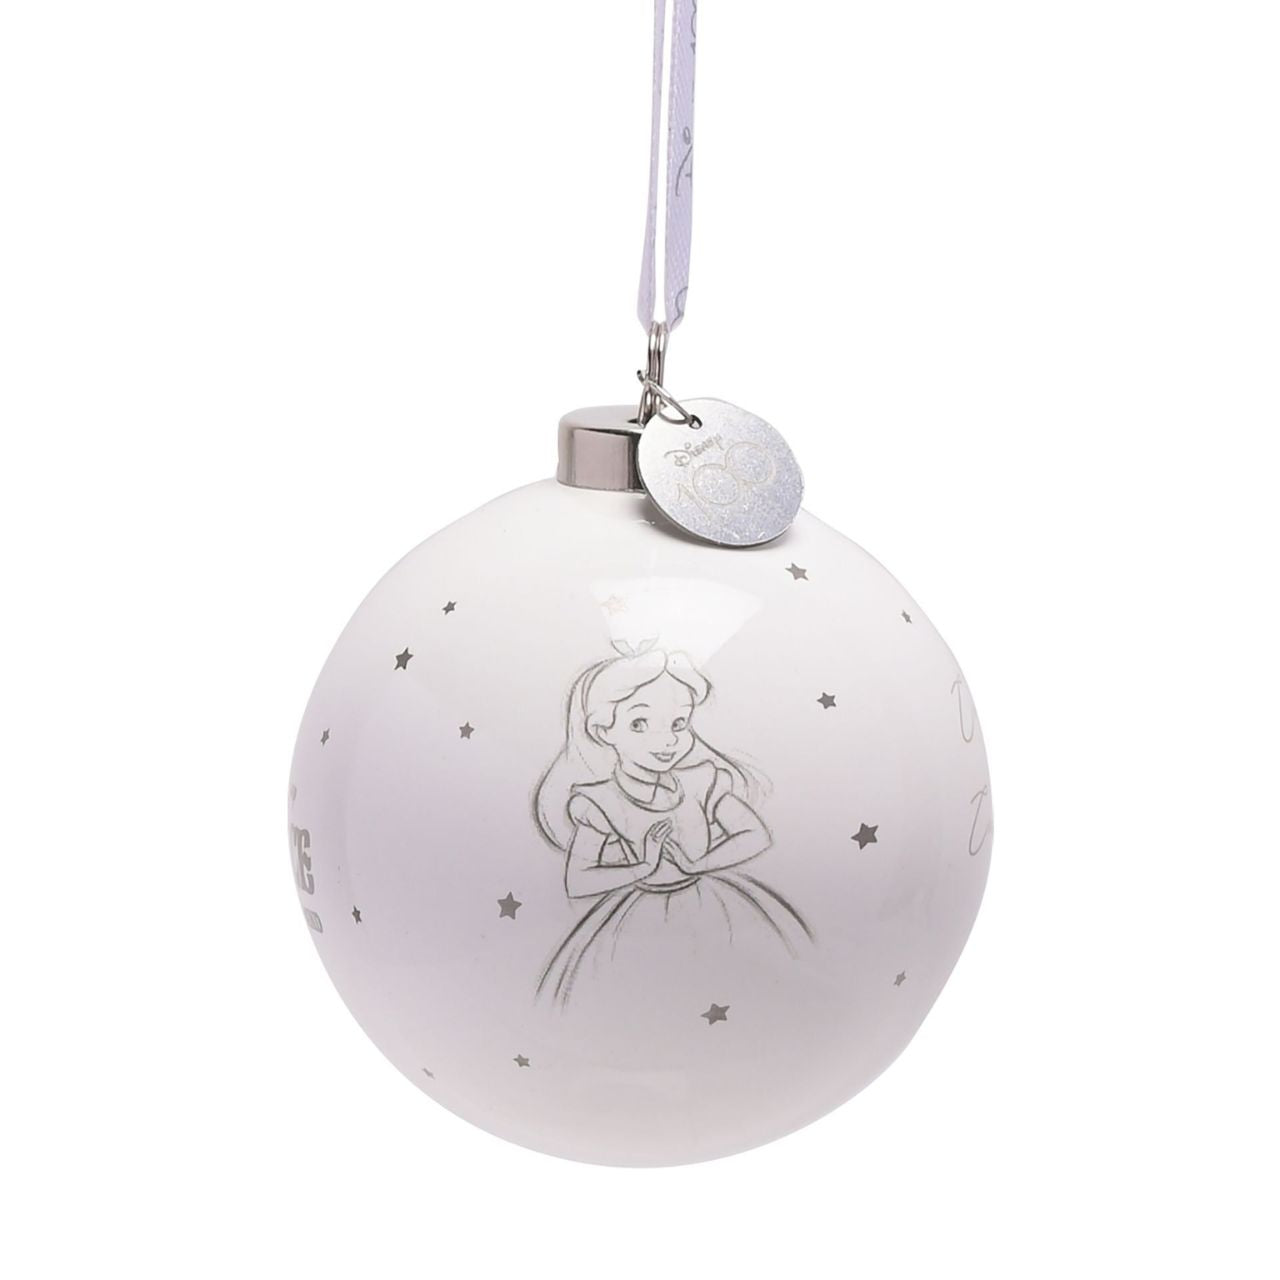 Disney 100th Anniversary Bauble - Alice  An Alice bauble from Disney 100 by DISNEY.  This limited edition tree decoration captures the true magic of Disney on its centenary and can be enjoyed by fans of all ages at Christmas.